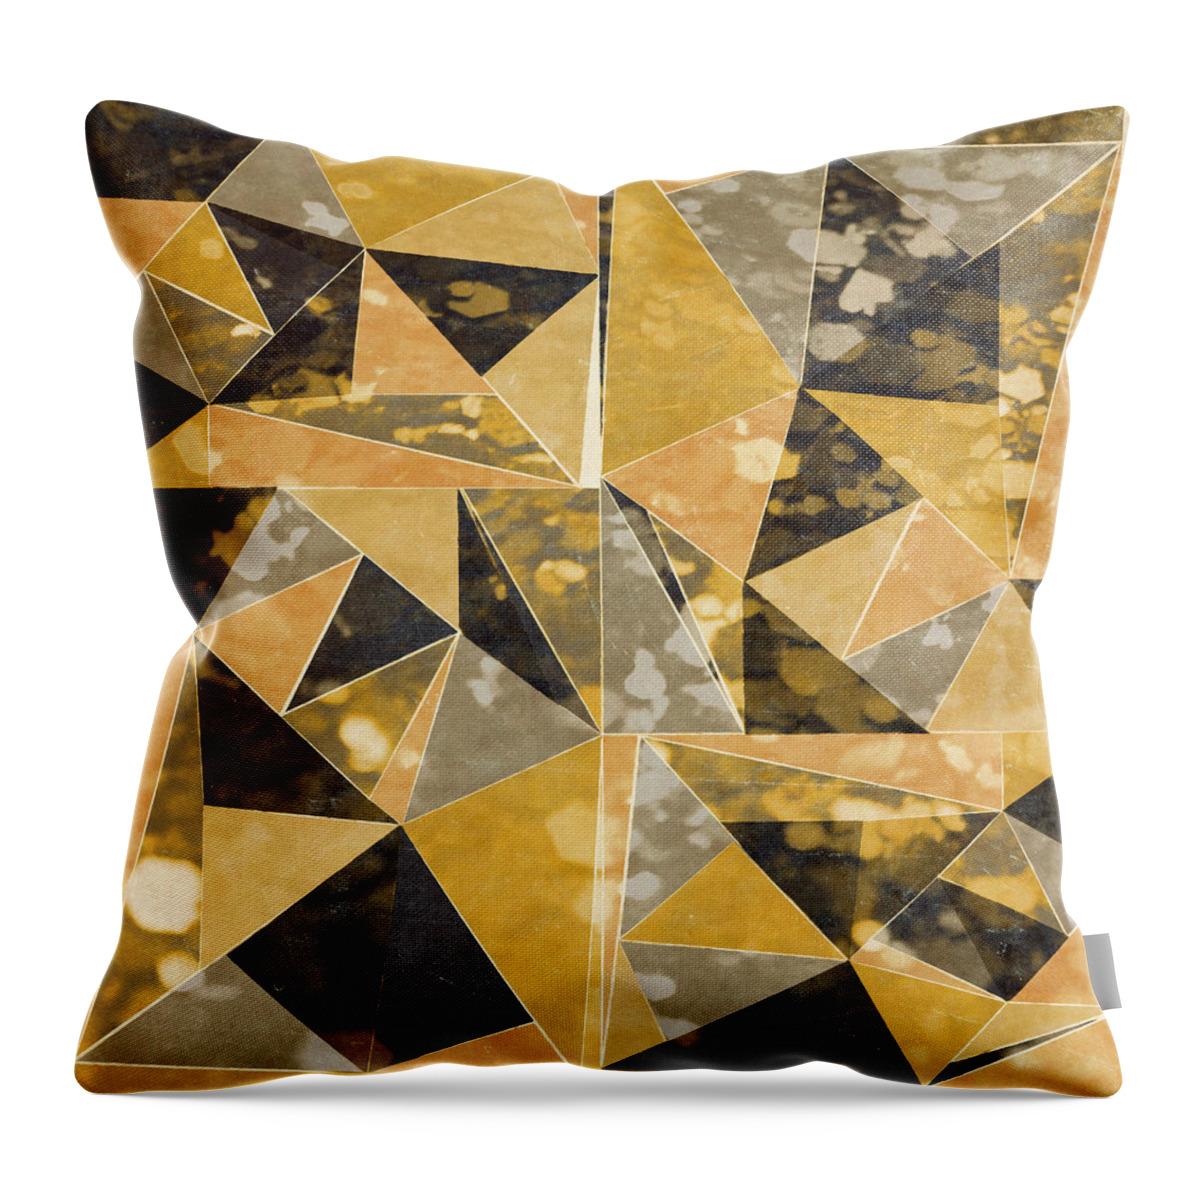 Omg Throw Pillow featuring the digital art Omg Gold Triangles I by South Social Studio